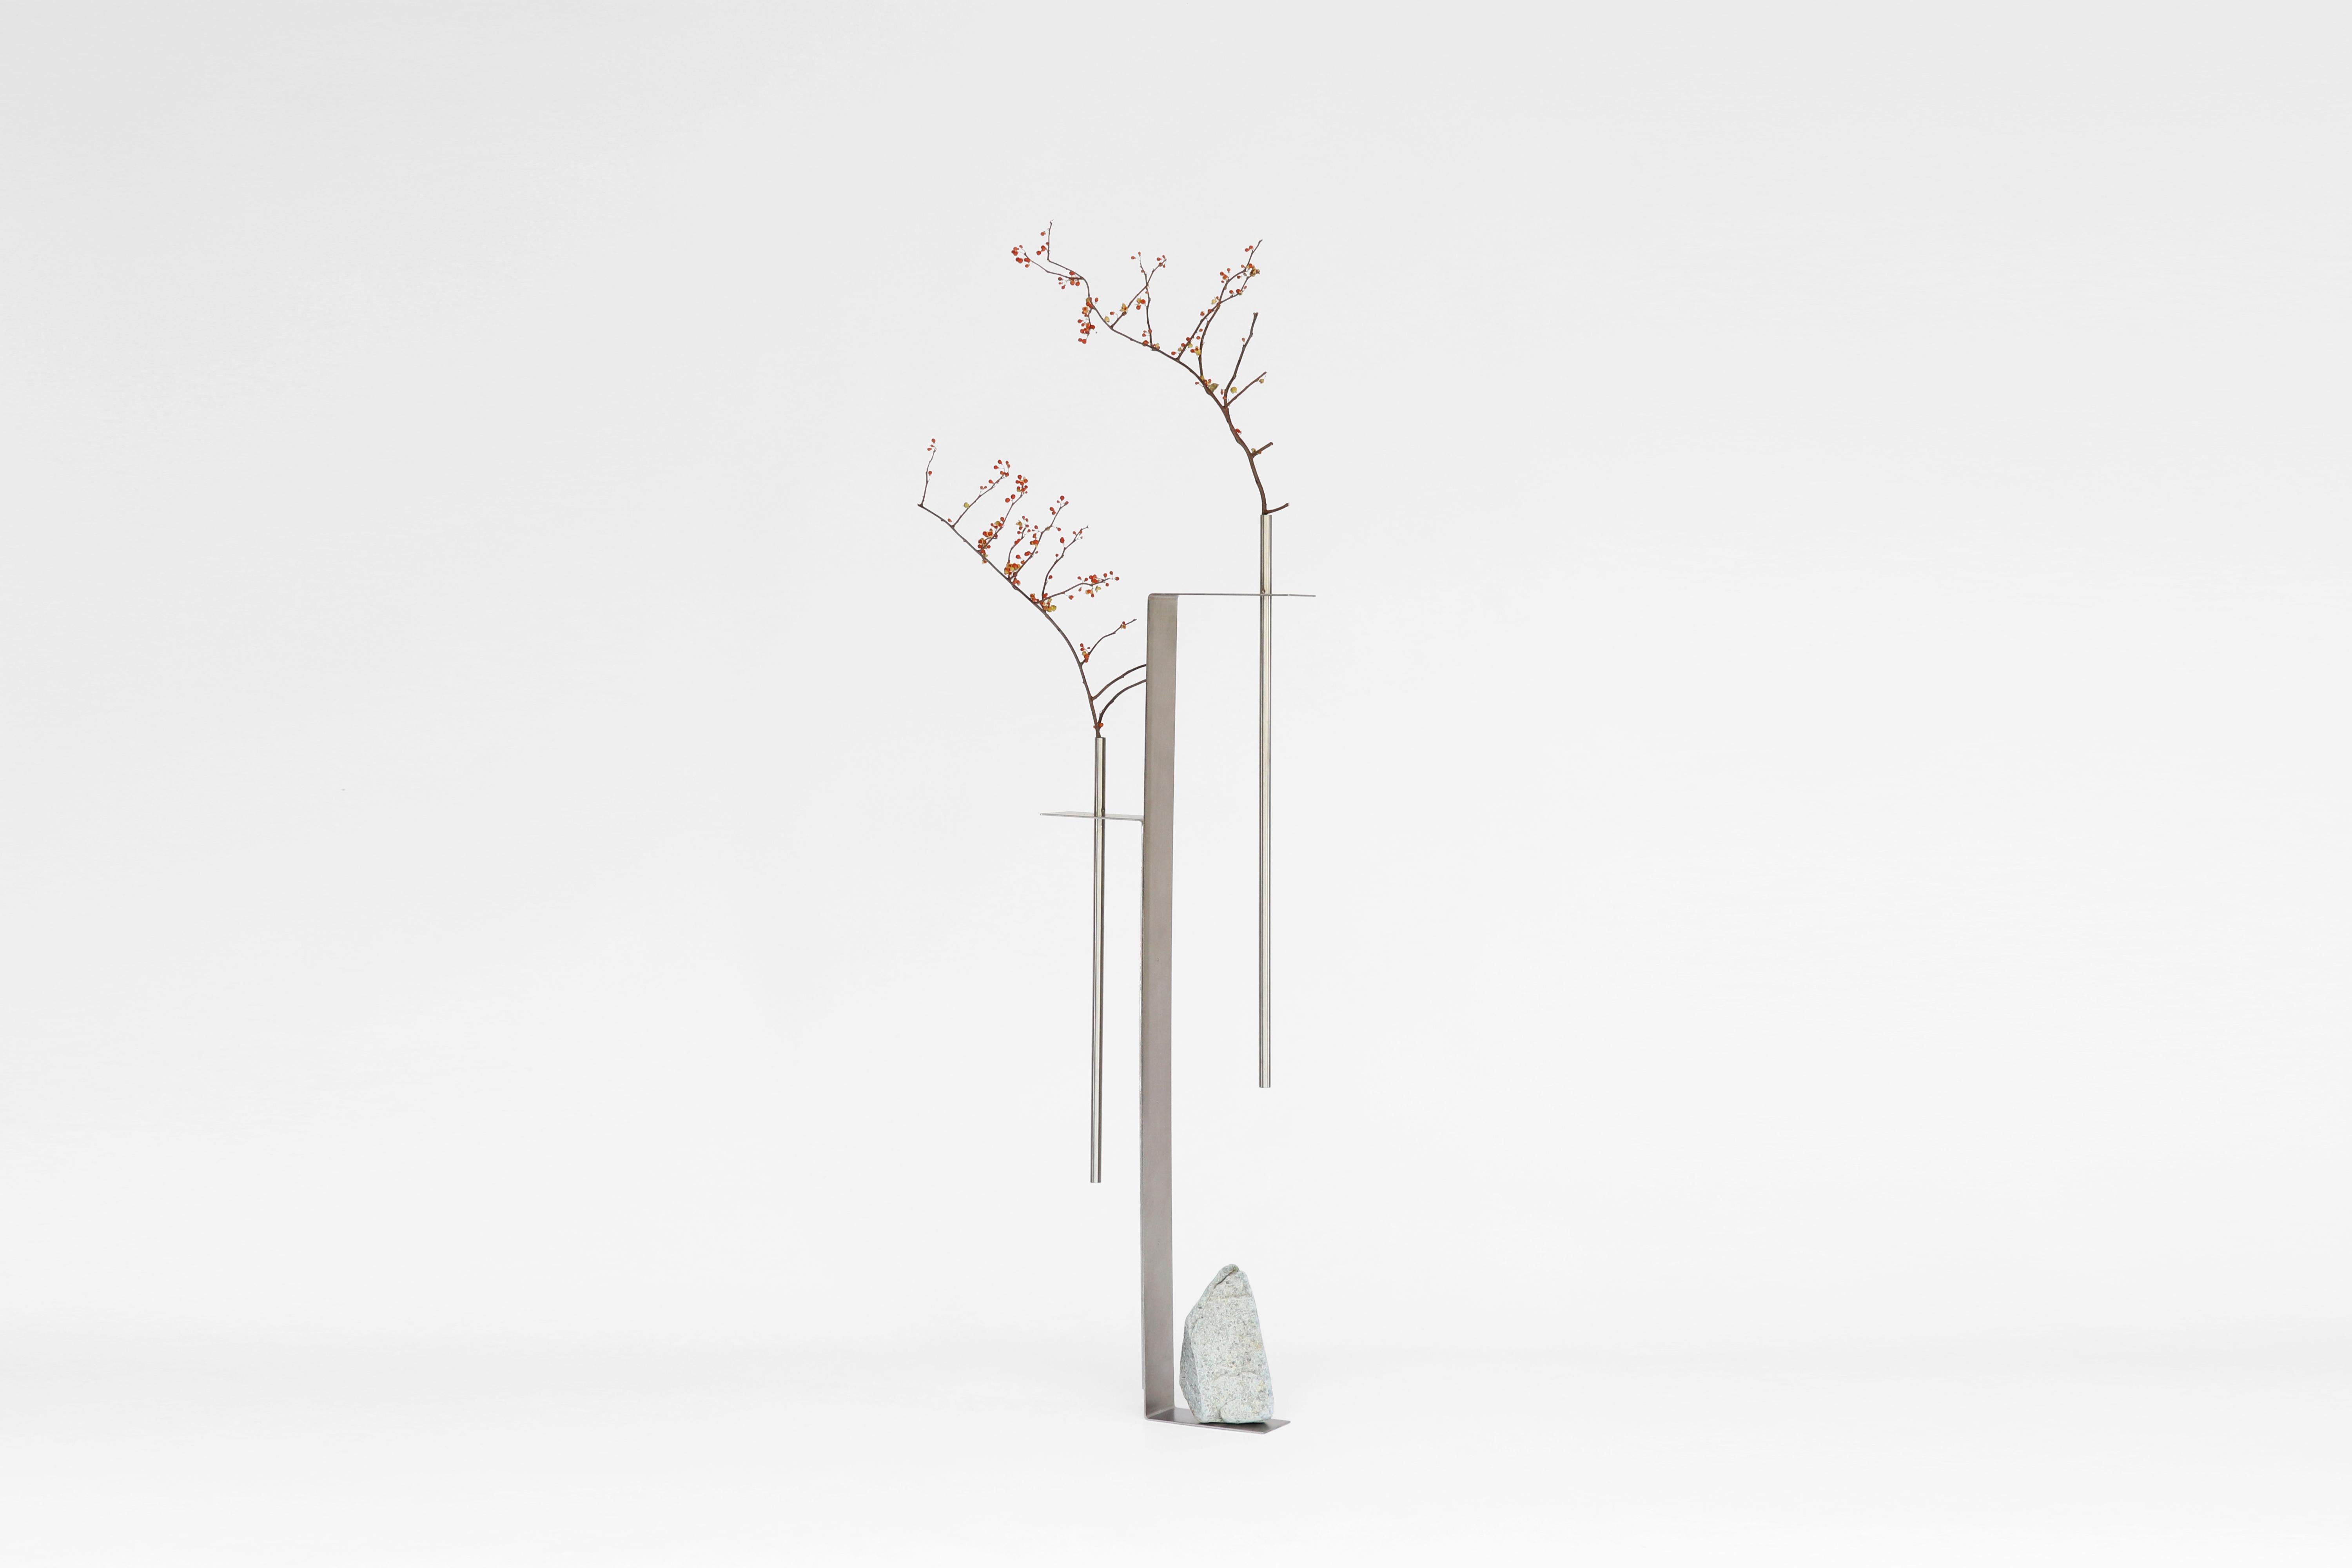 Odd balance 03 by Batten and Kamp
2020
Shelter to Ground Collection
Signed
Limitied Edition 8 + 2 AP
Dimensions: Approximate W 37 x D 10 x H 120 cm
Materials: Hand stainless steel, natural stone
 
The stone is different with each piece and